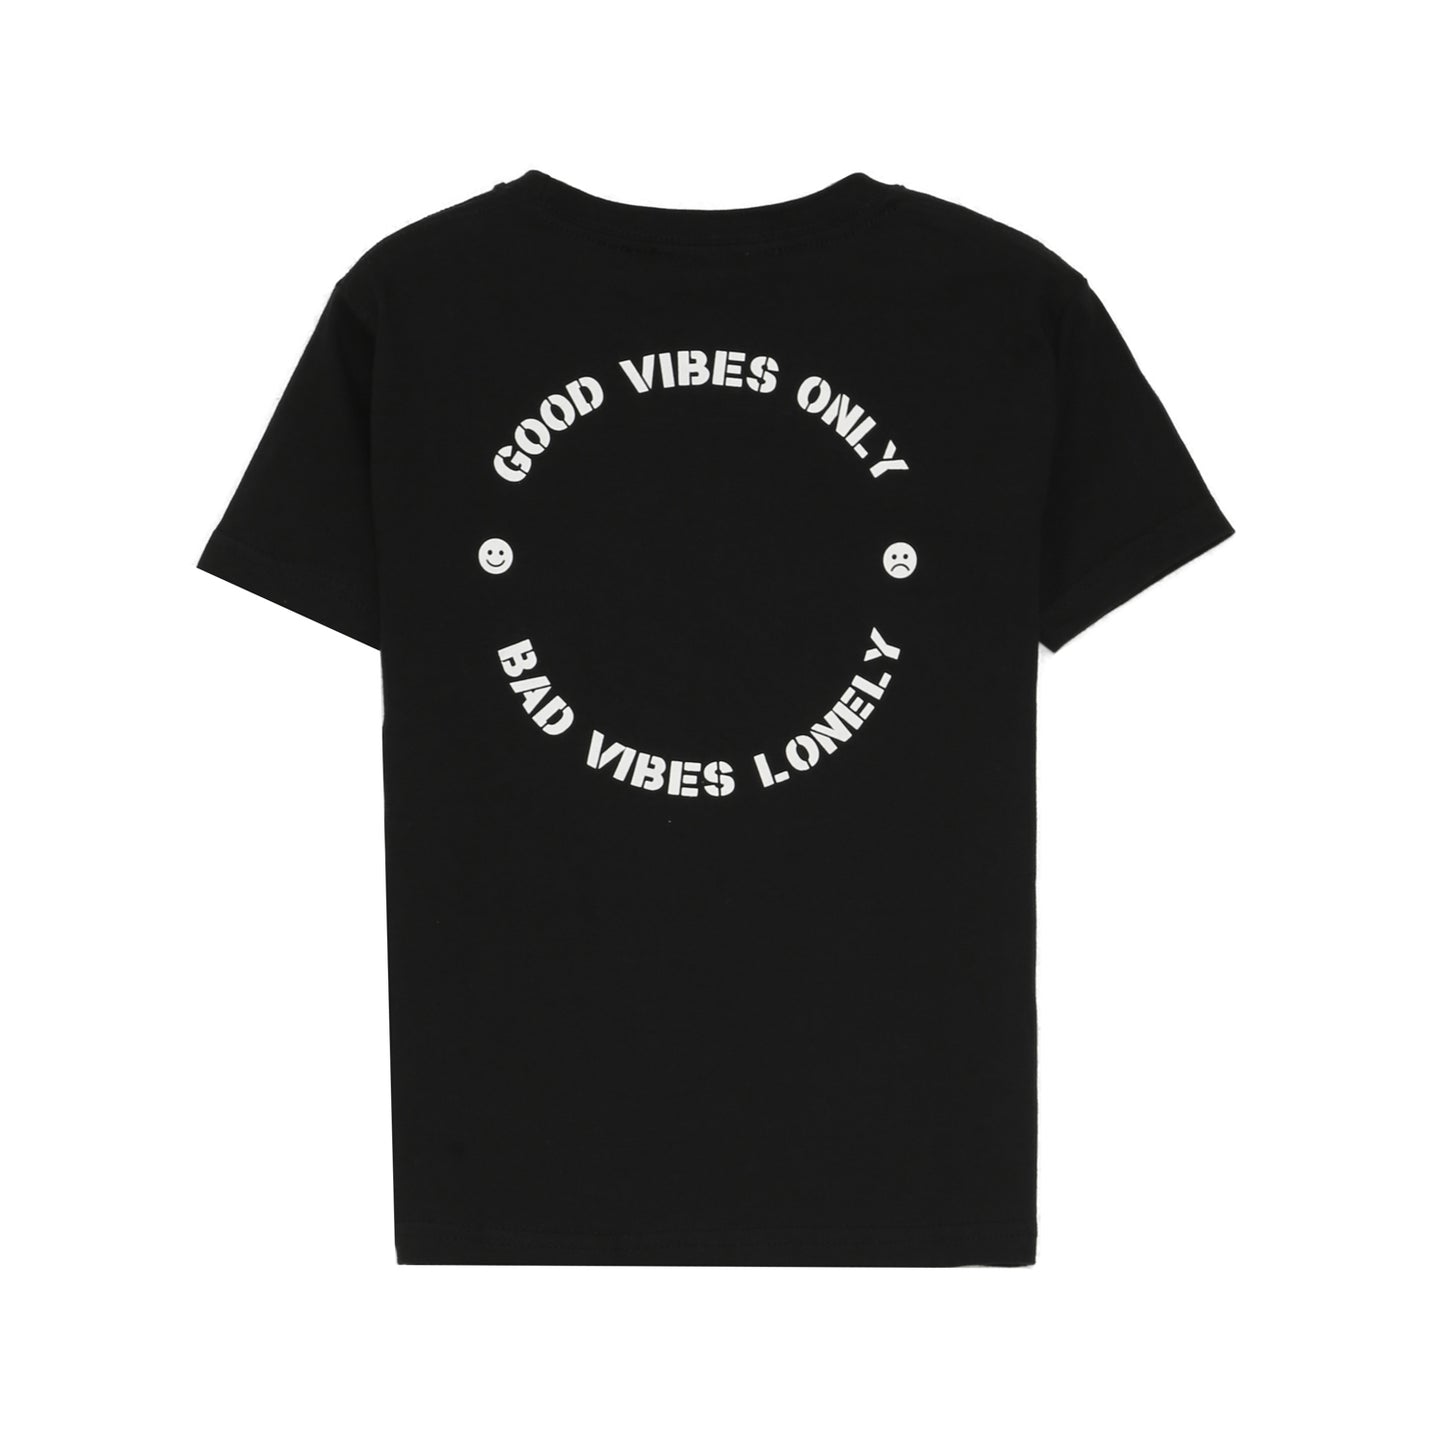 Aly Good Vibes - Bad Vibes Lonely Tee (Black) (Kid Size)